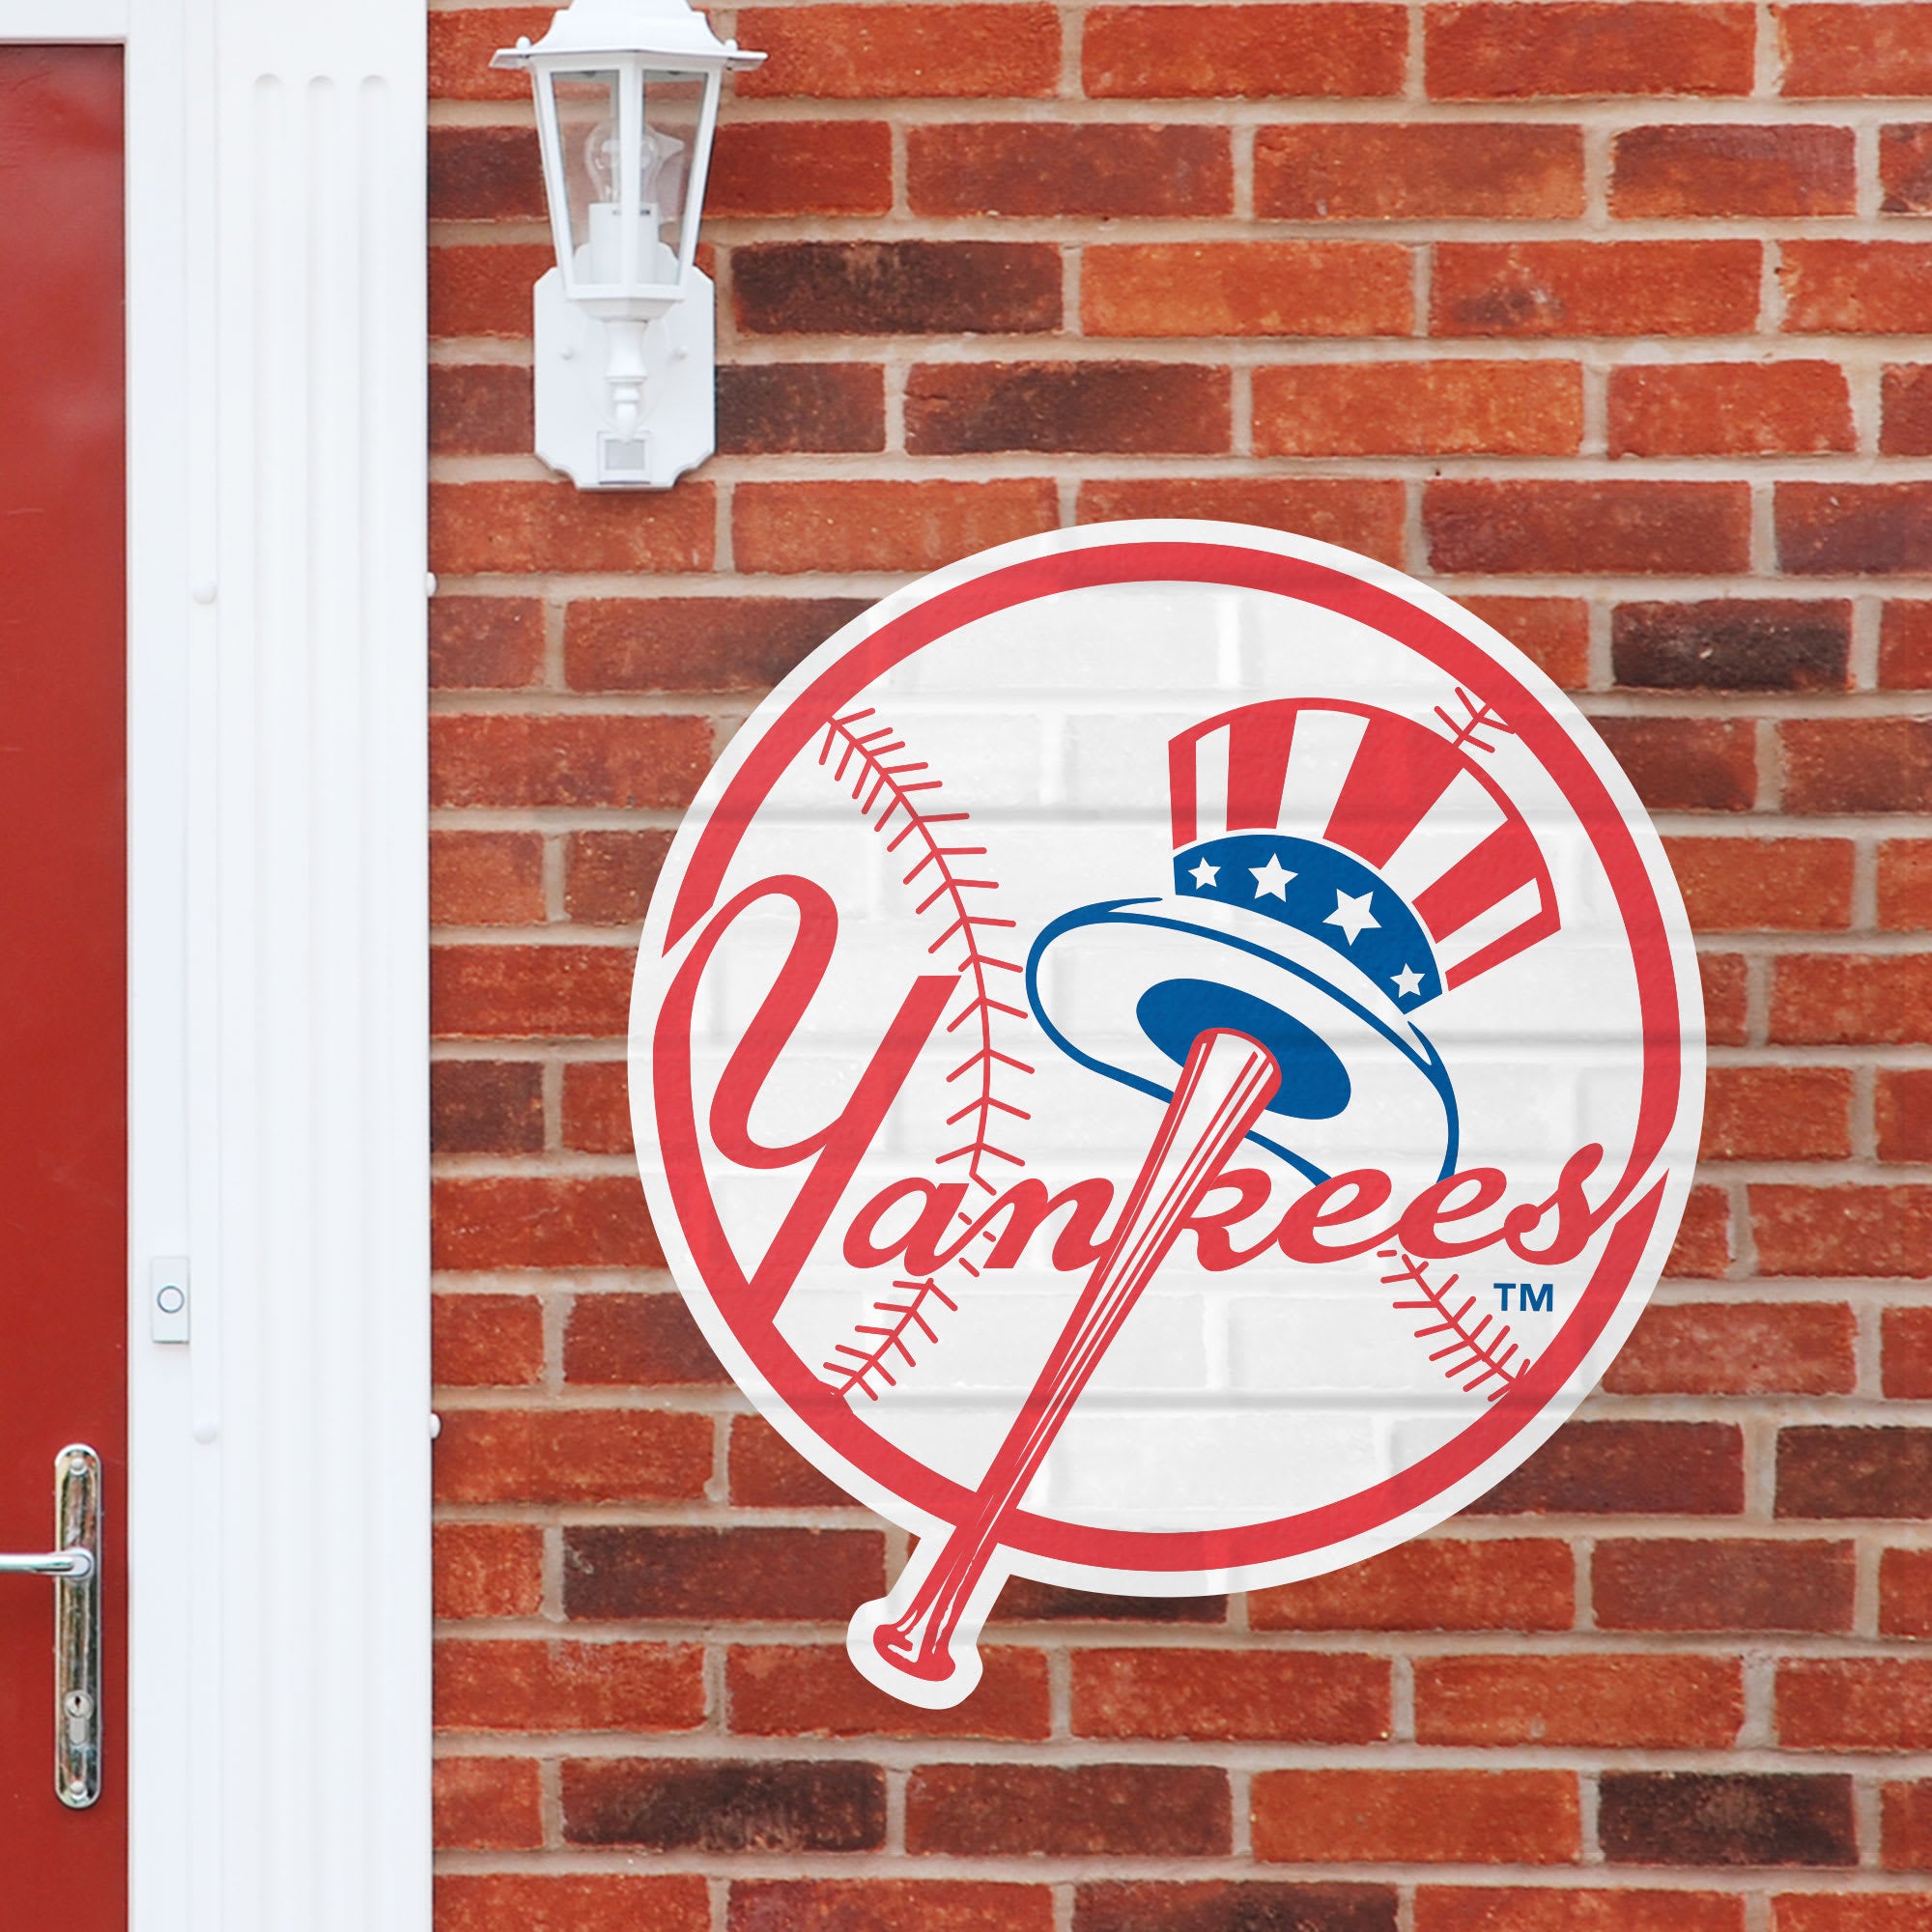 New York Yankees: Logo - Officially Licensed MLB Outdoor Graphic Giant Logo (30"W x 30"H) by Fathead | Wood/Aluminum